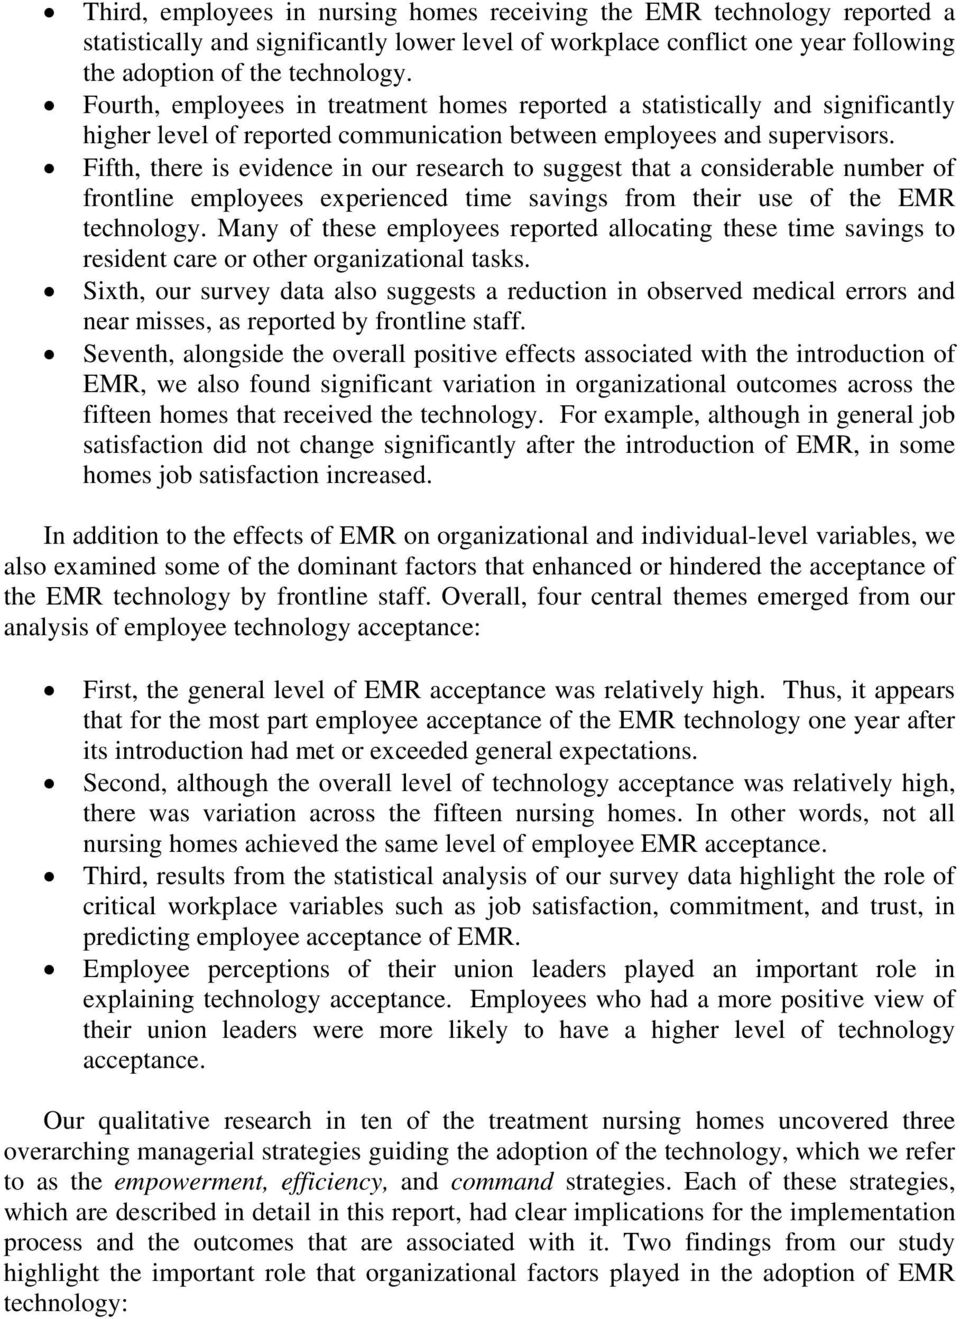 Fifth, there is evidence in our research to suggest that a considerable number of frontline employees experienced time savings from their use of the EMR technology.